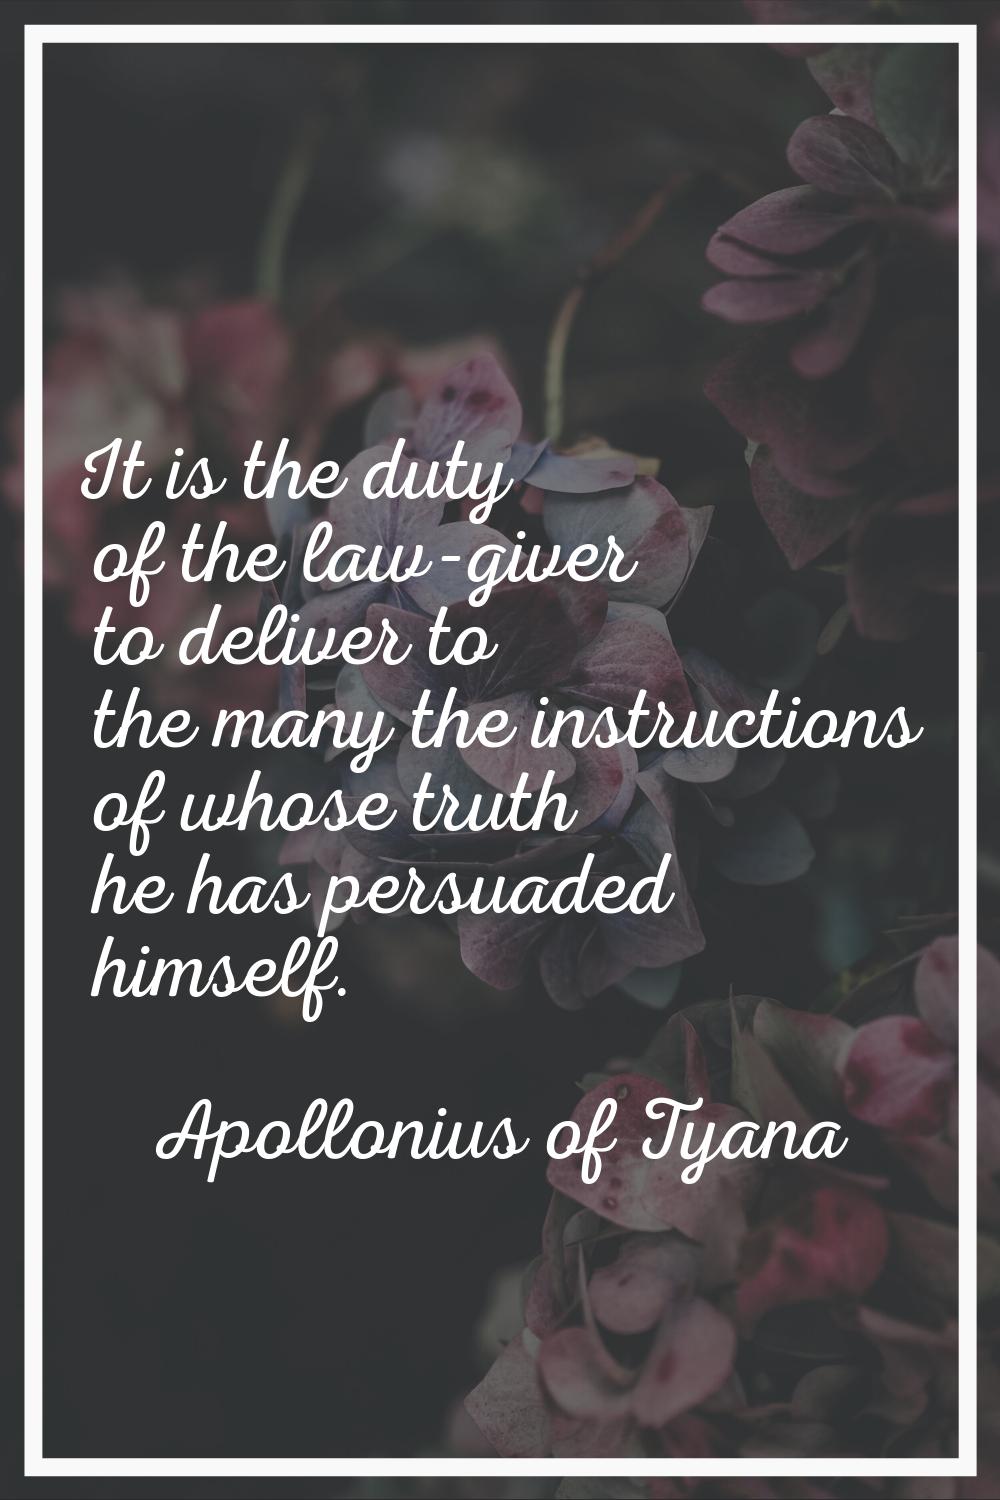 It is the duty of the law-giver to deliver to the many the instructions of whose truth he has persu